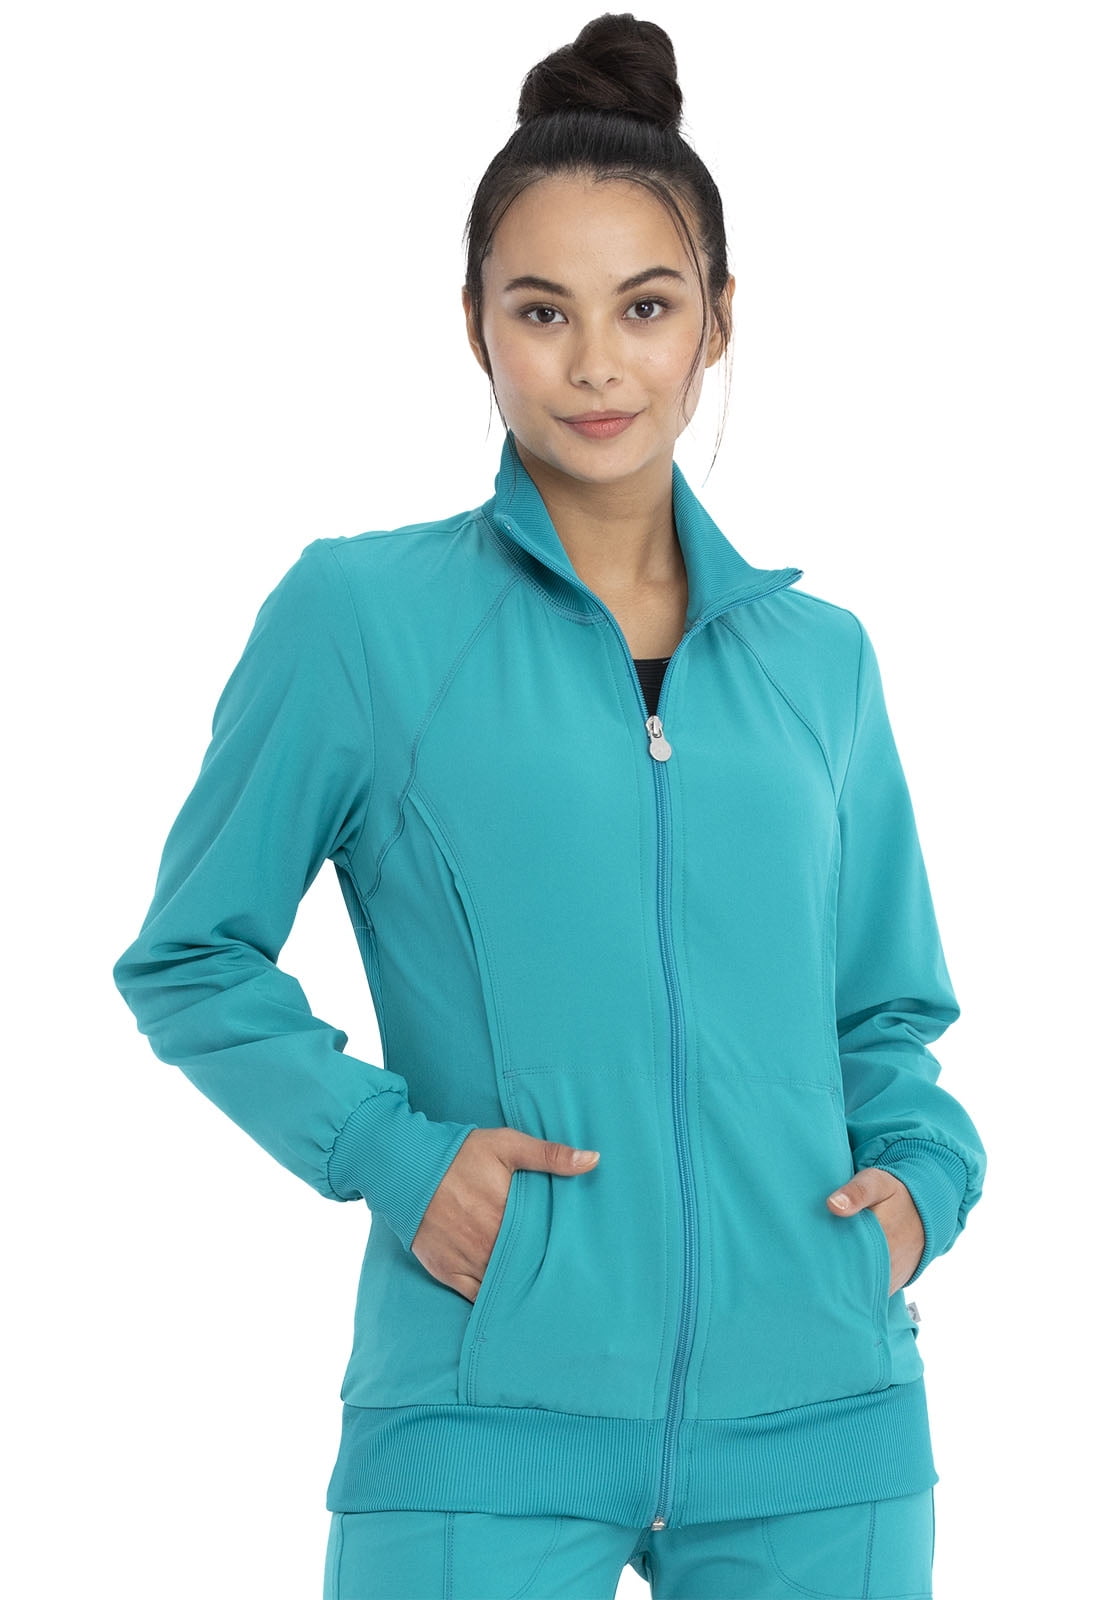 Teal Blue Cherokee Scrubs Infinity Zip Front Jacket 2391A TLPS Antimicrobial 